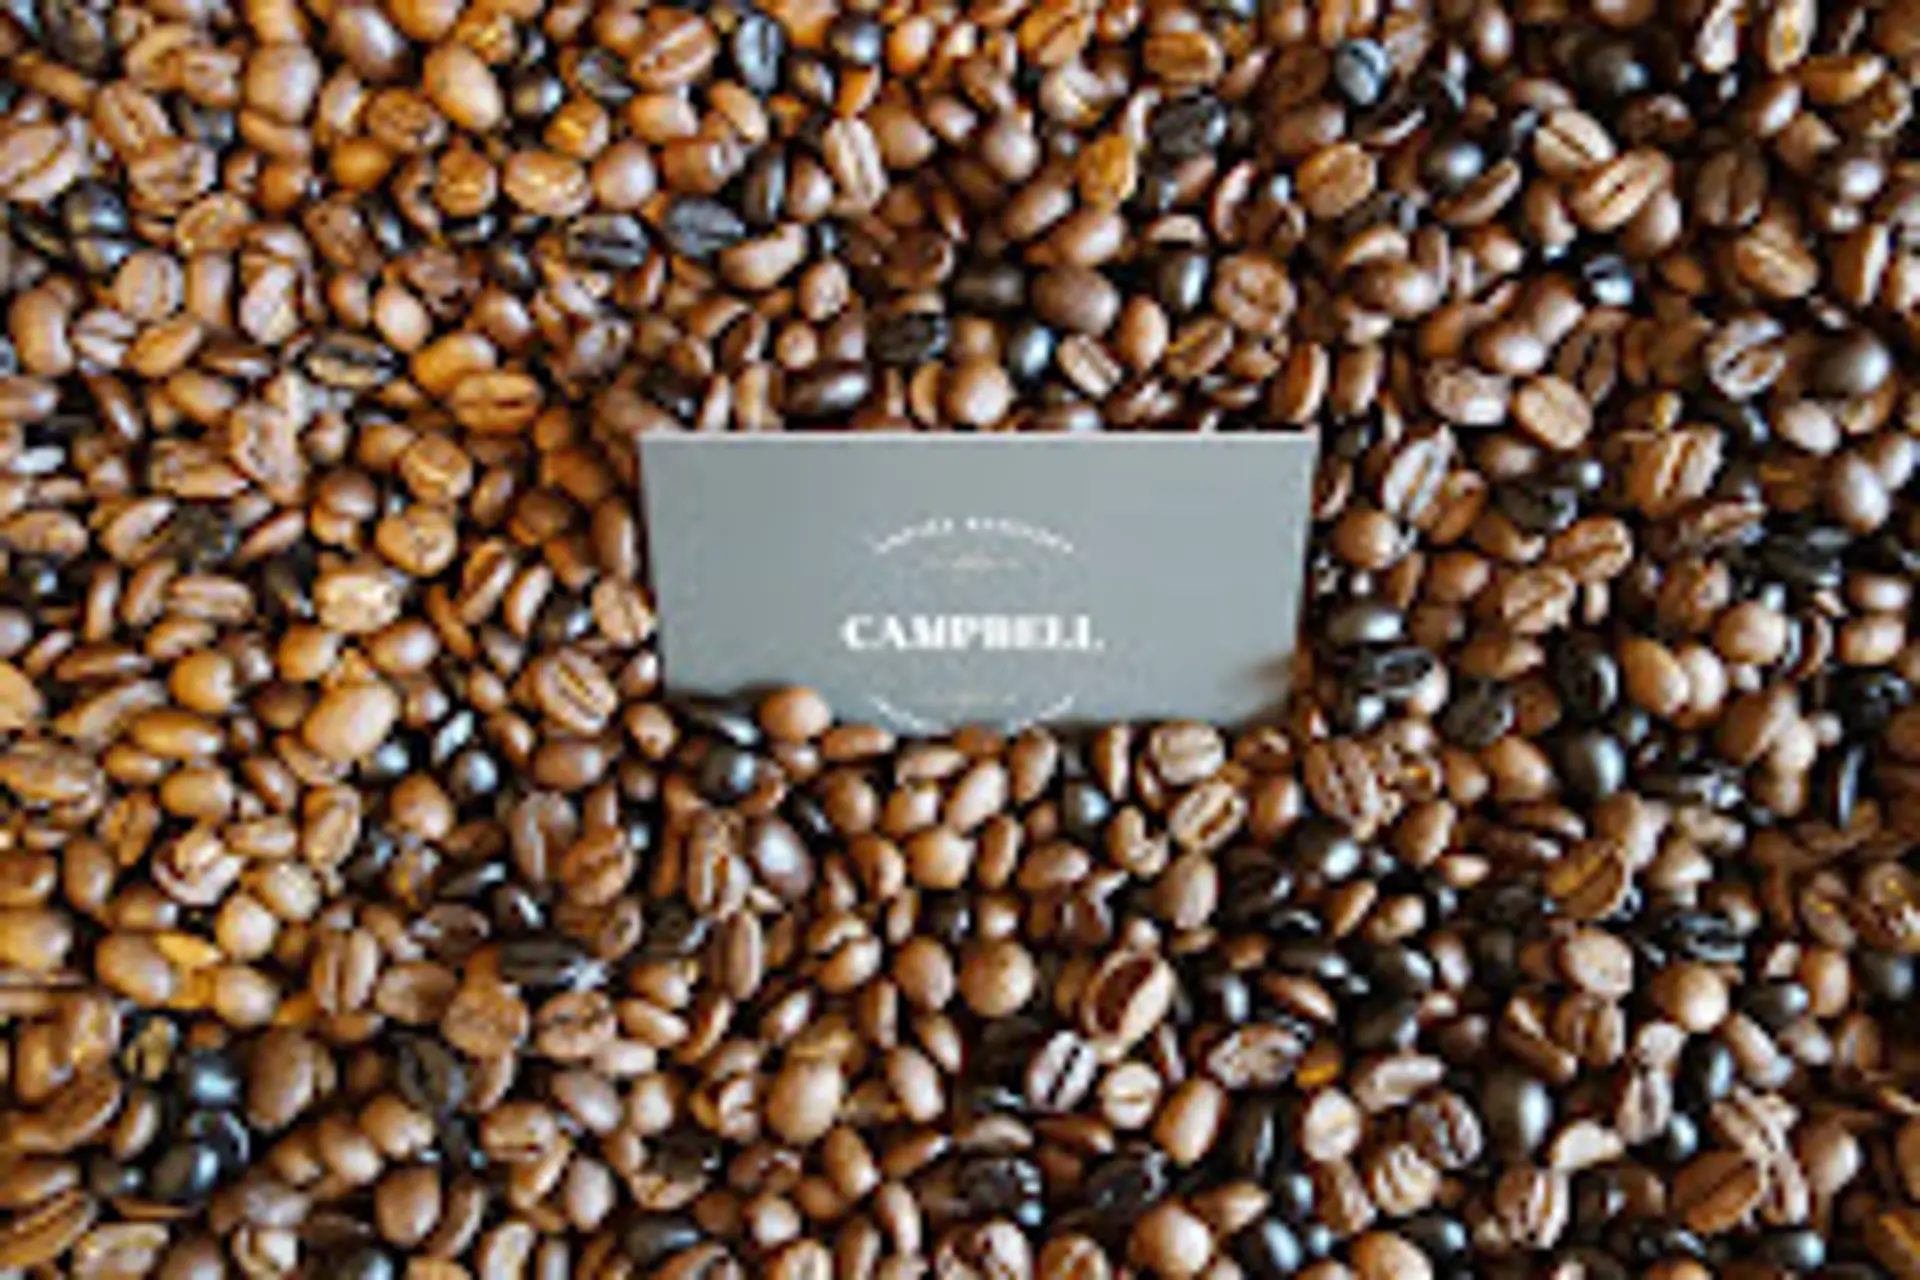 Campbell Coffee Beans